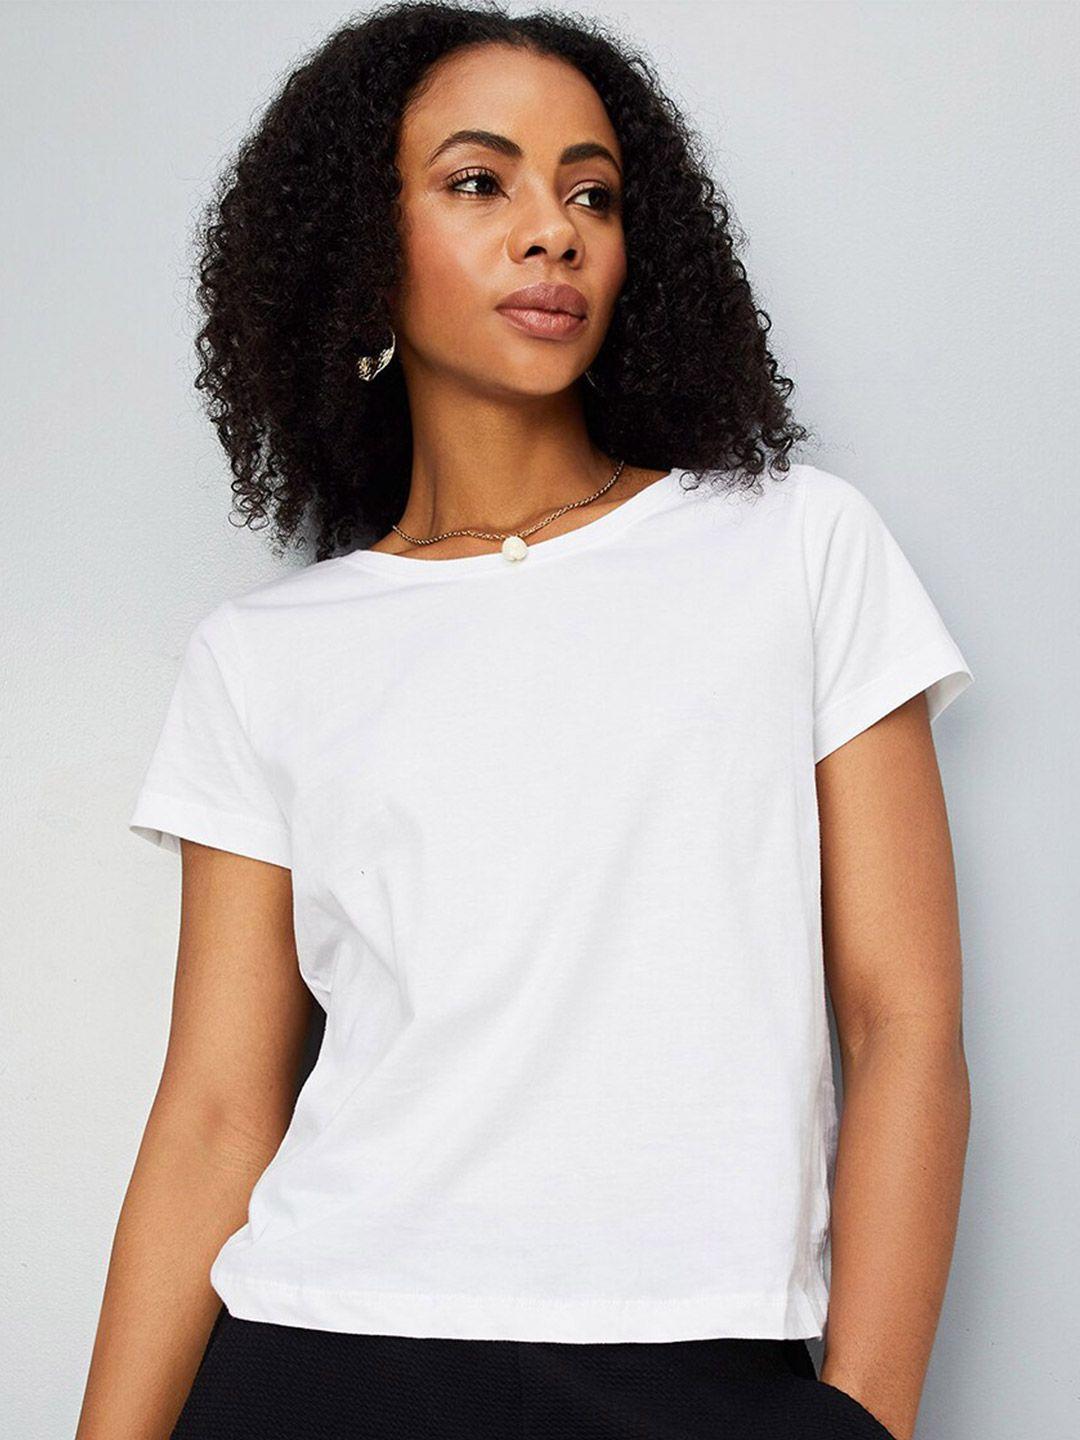 max-round-neck-short-sleeves-pure-cotton-t-shirt